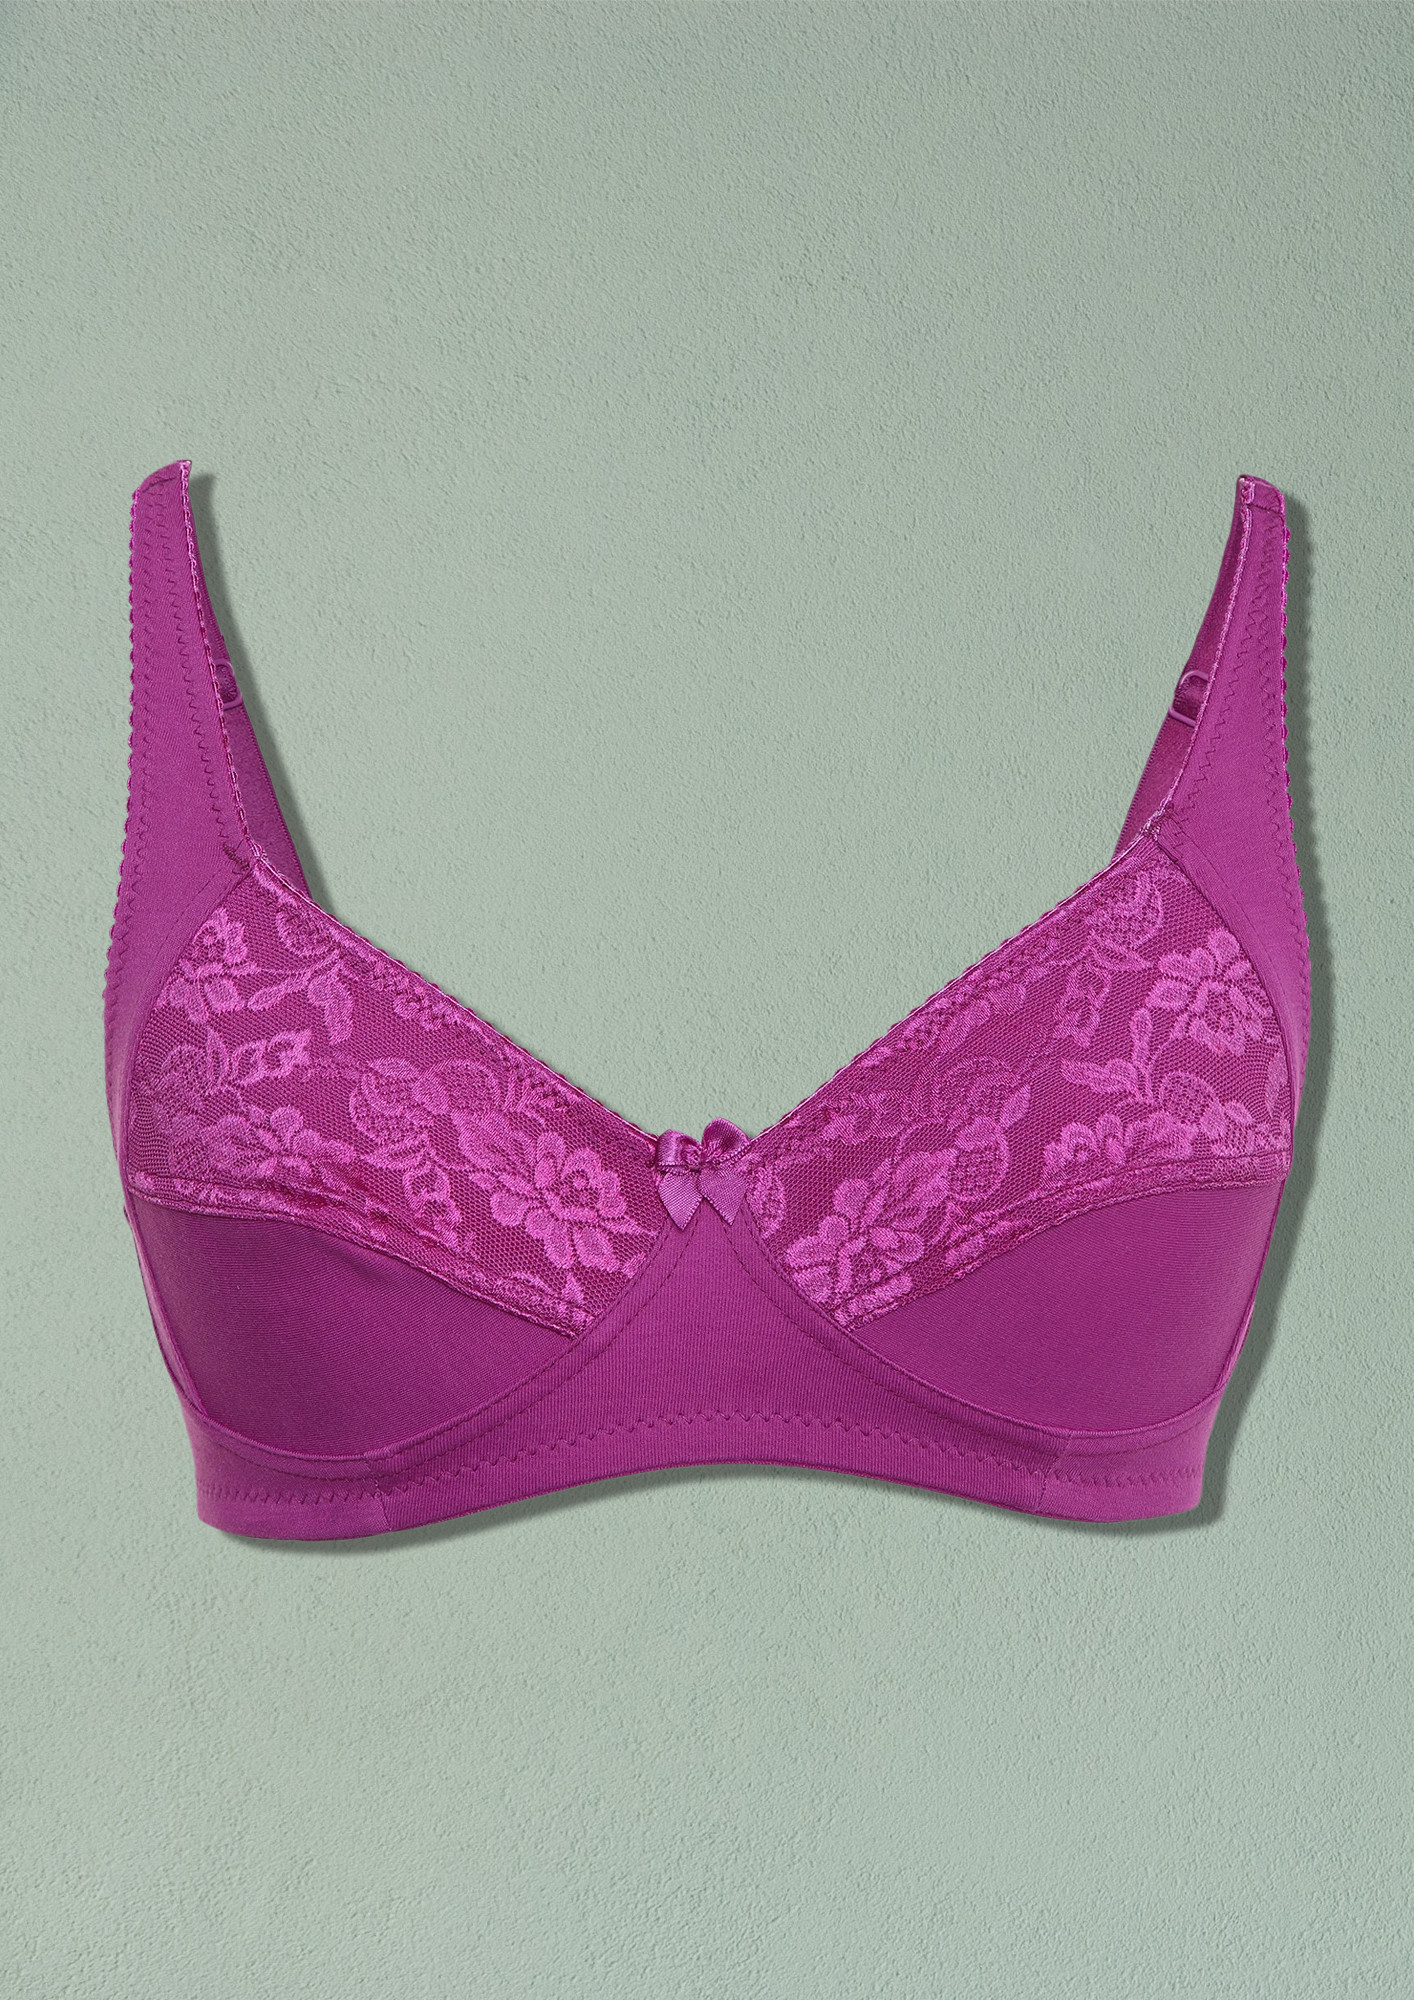 Buy Non-Padded Non-Wired Full Cup Bra in Hot Pink - Lace Online